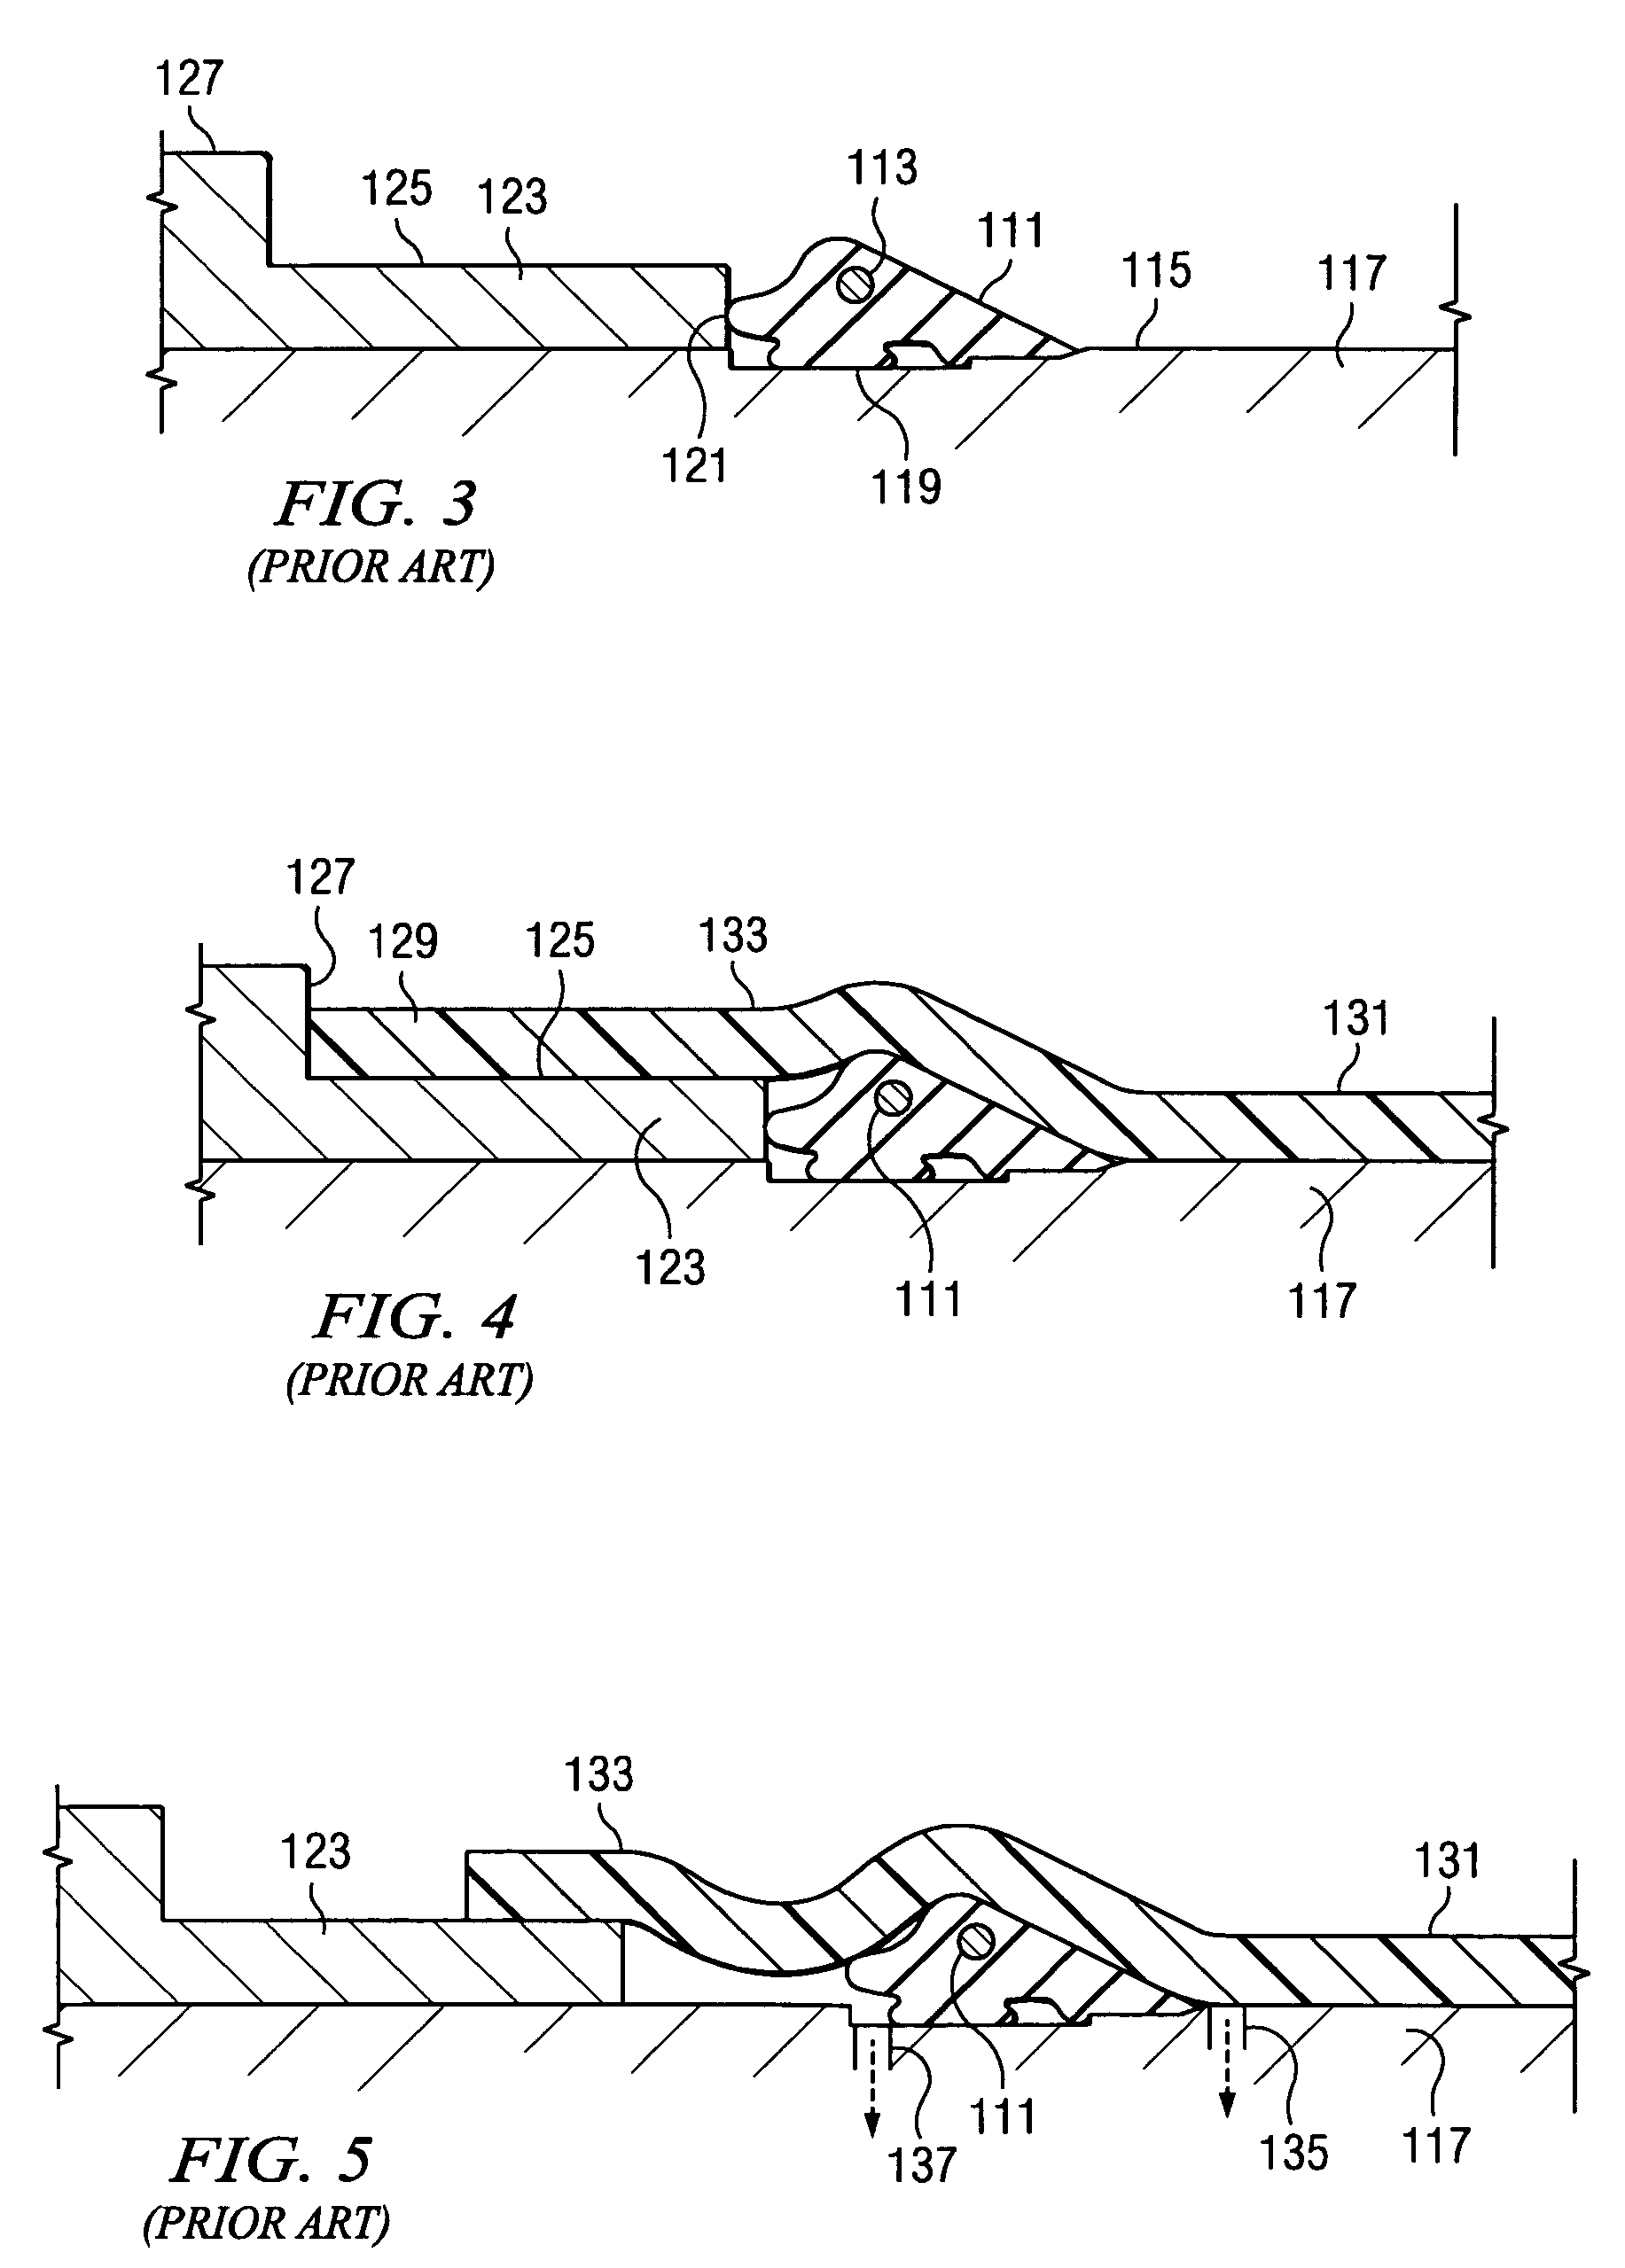 Method of manufacturing a seal and restraining system